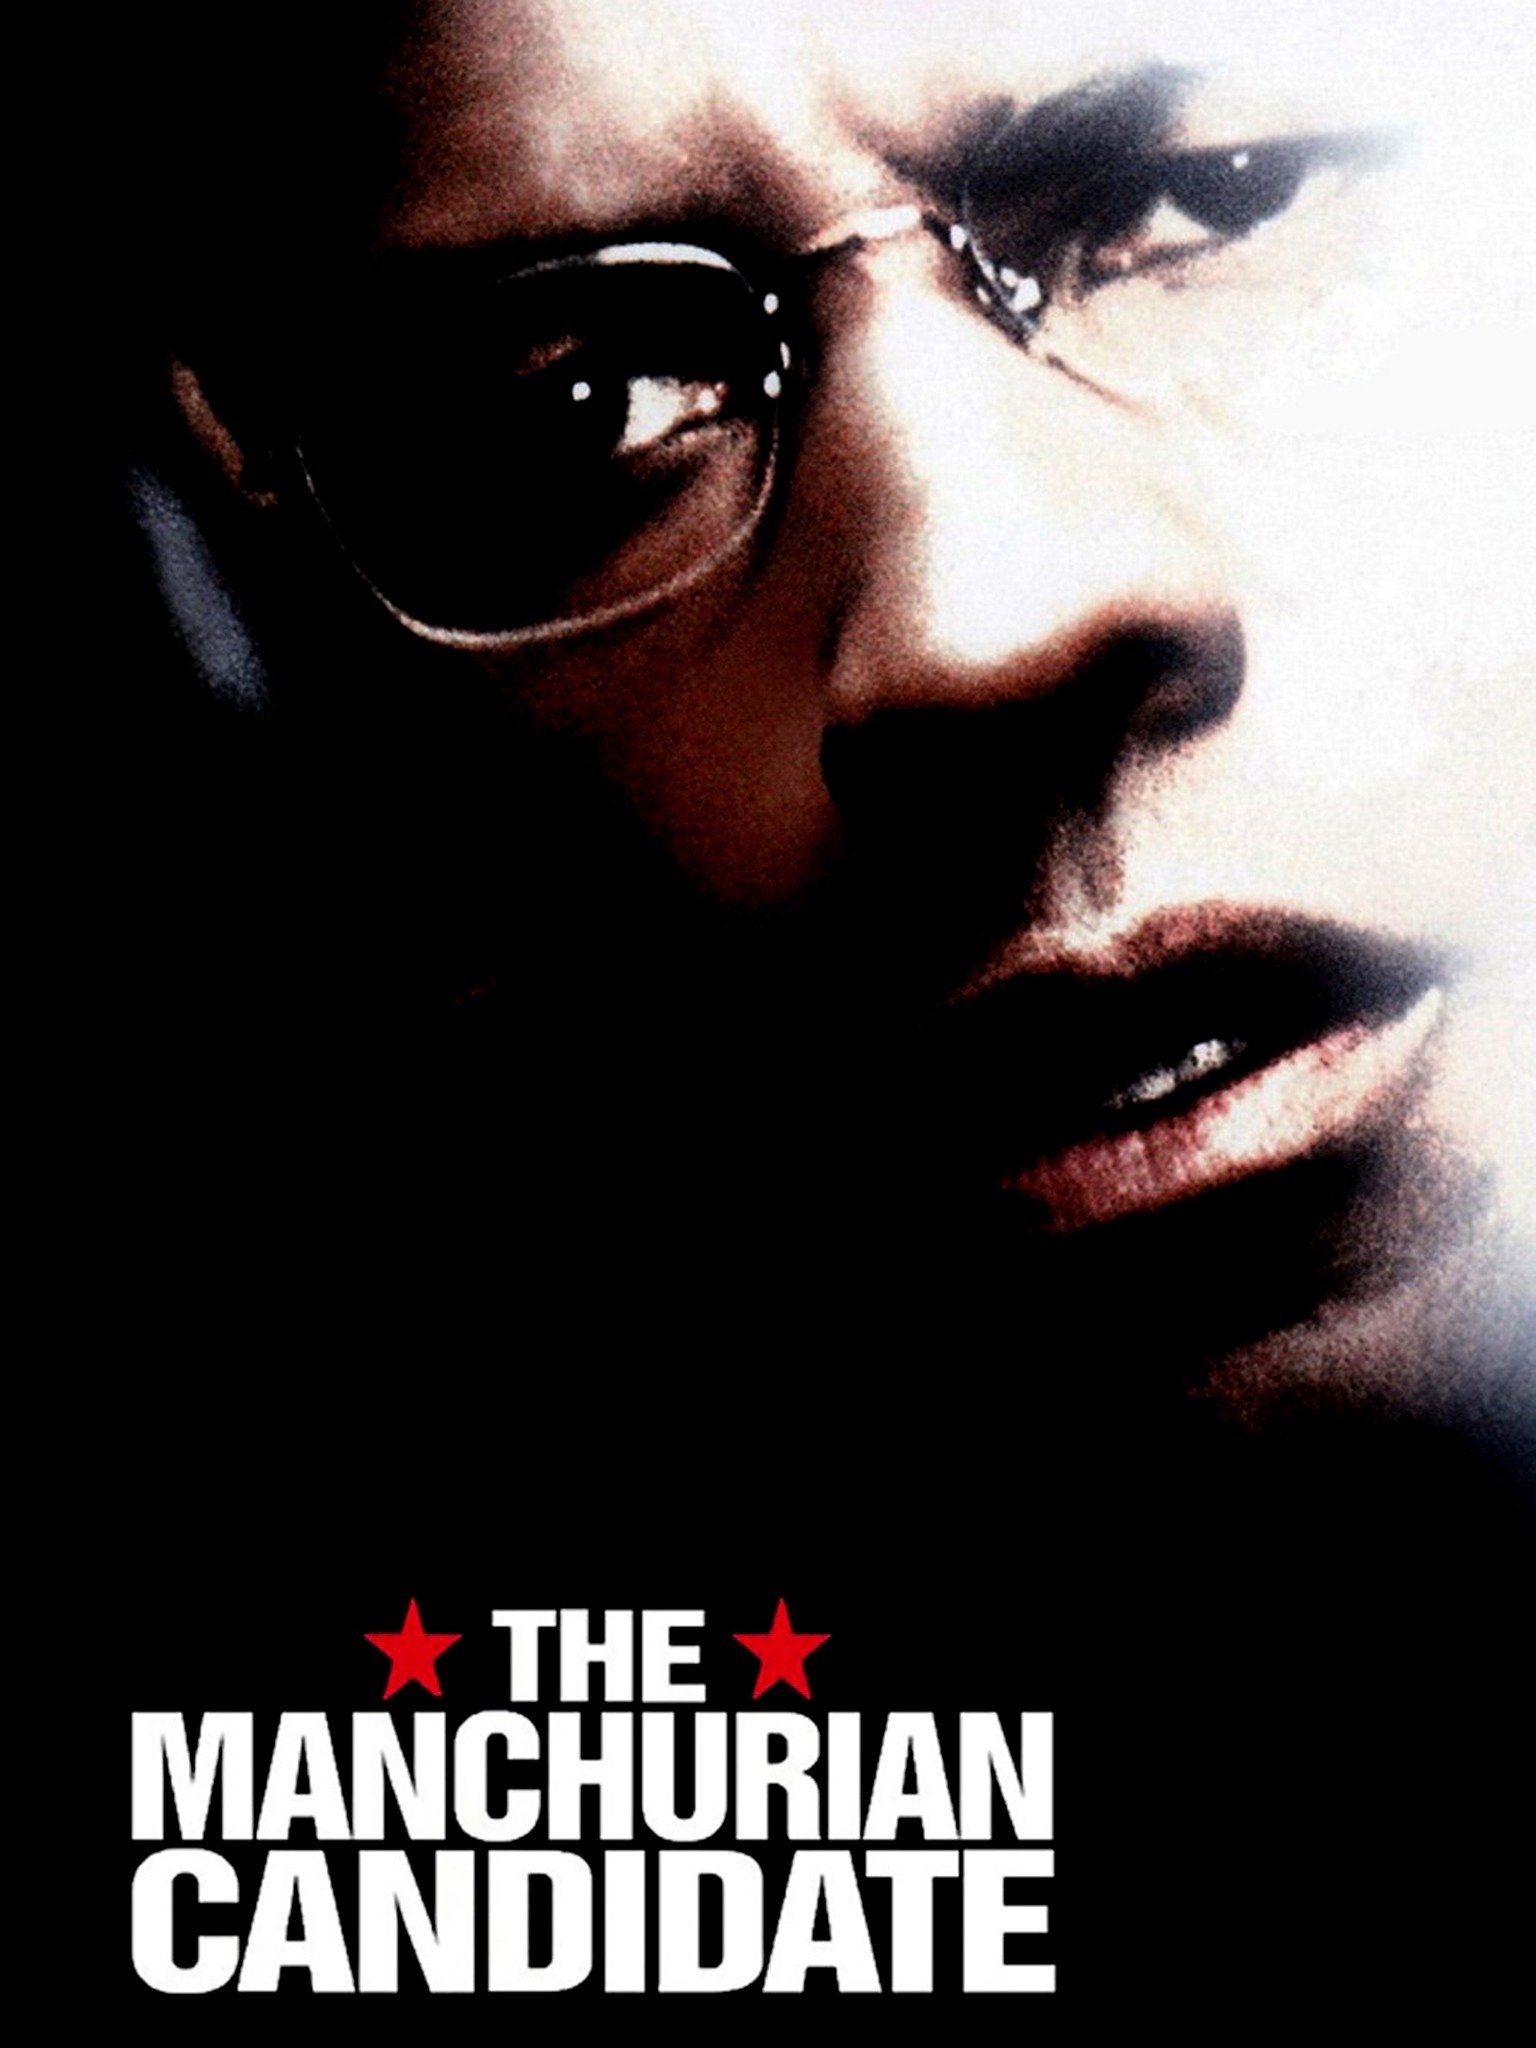 the manchurian candidate 1962 full movie online